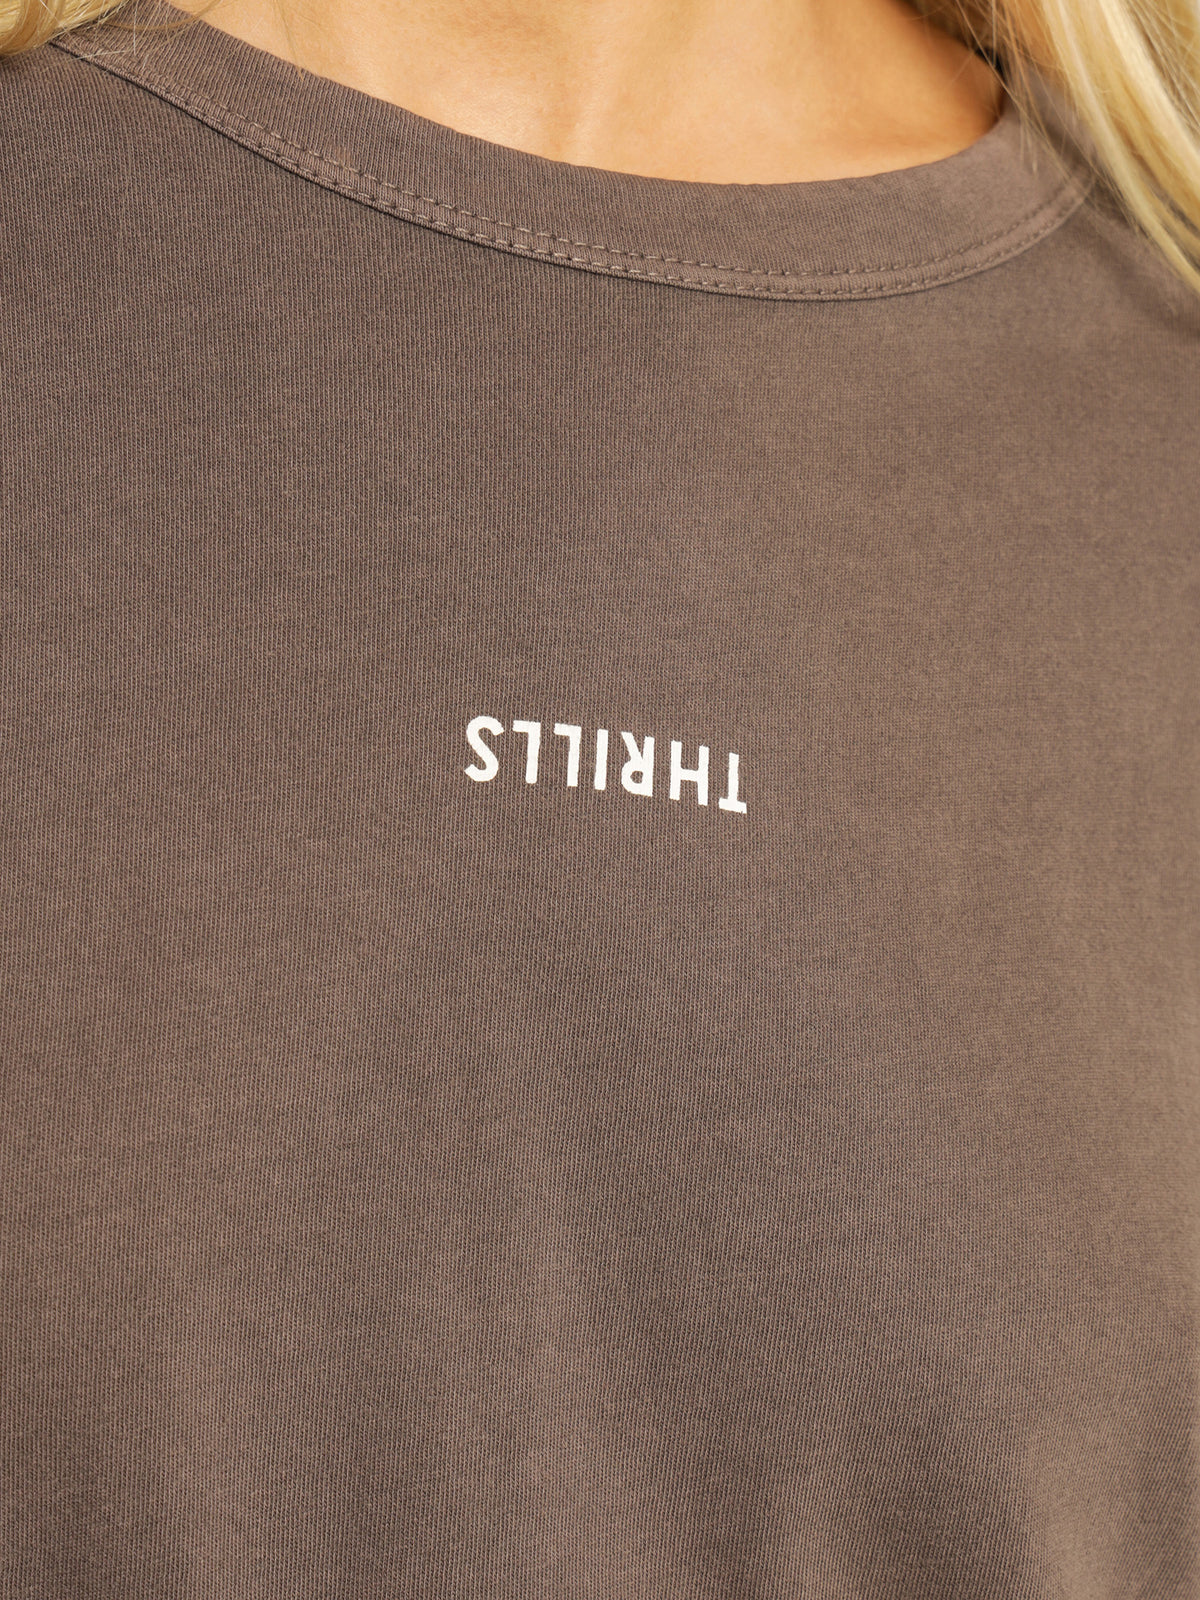 Minimal Thrills Relaxed T-Shirt in Plum